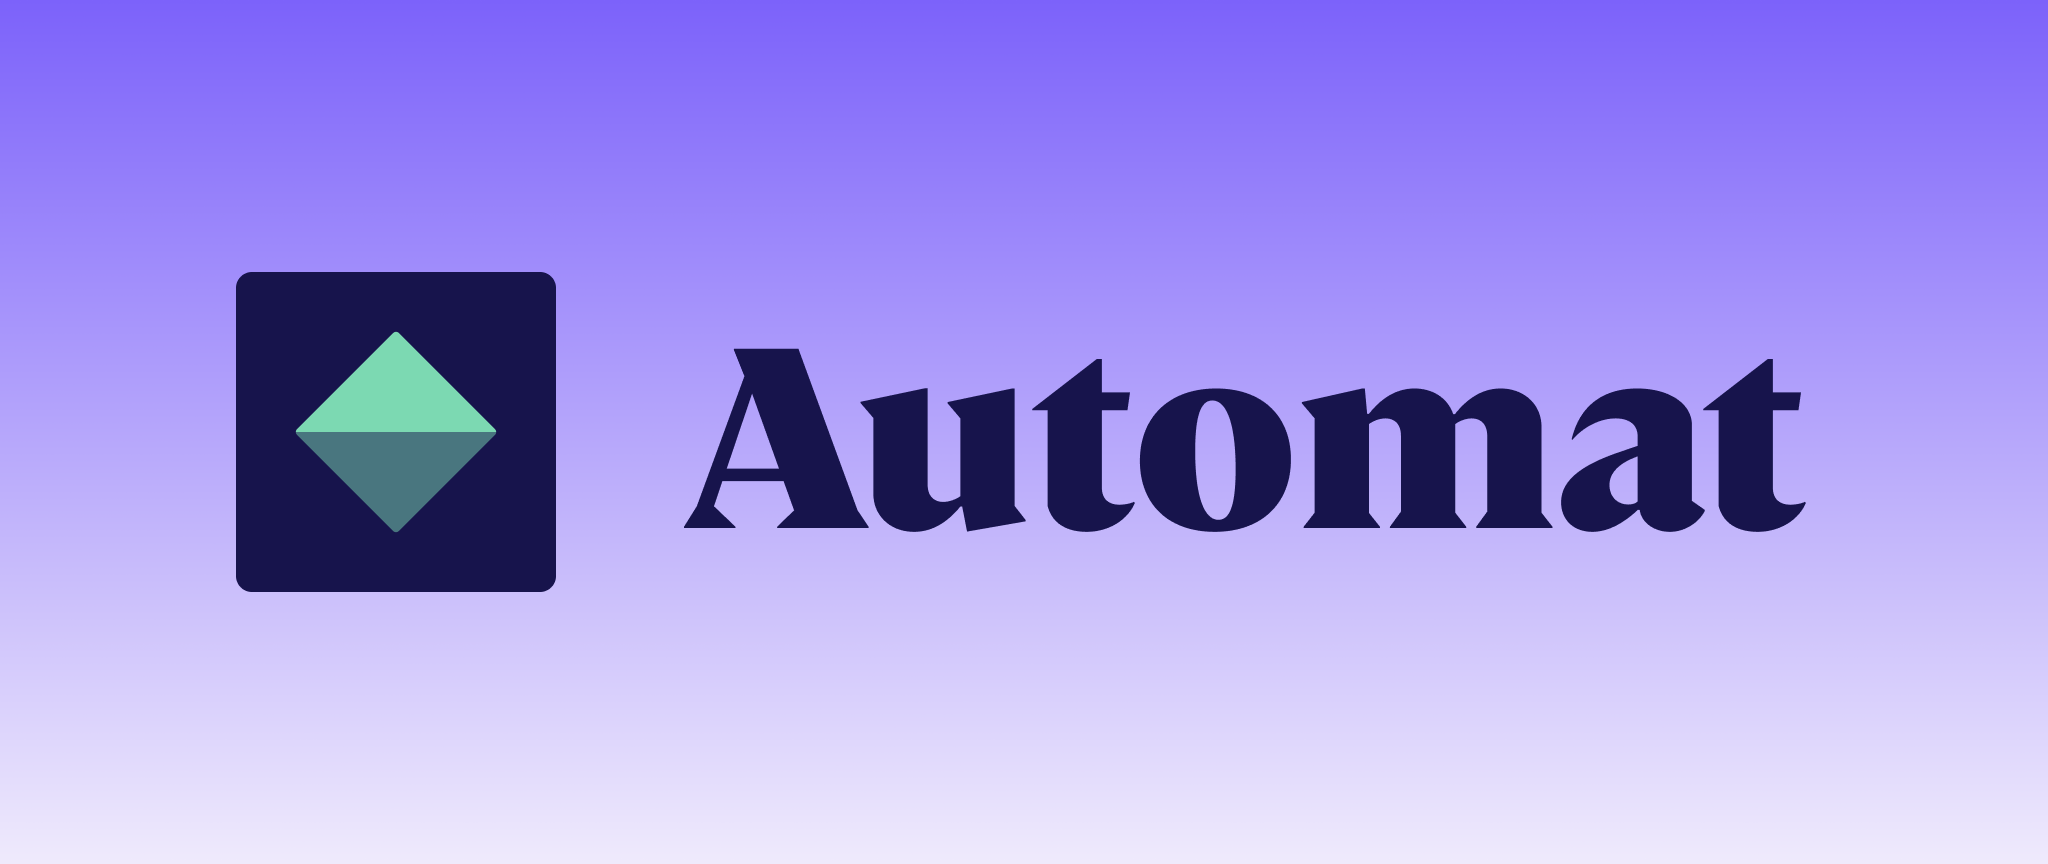 The Automat icon